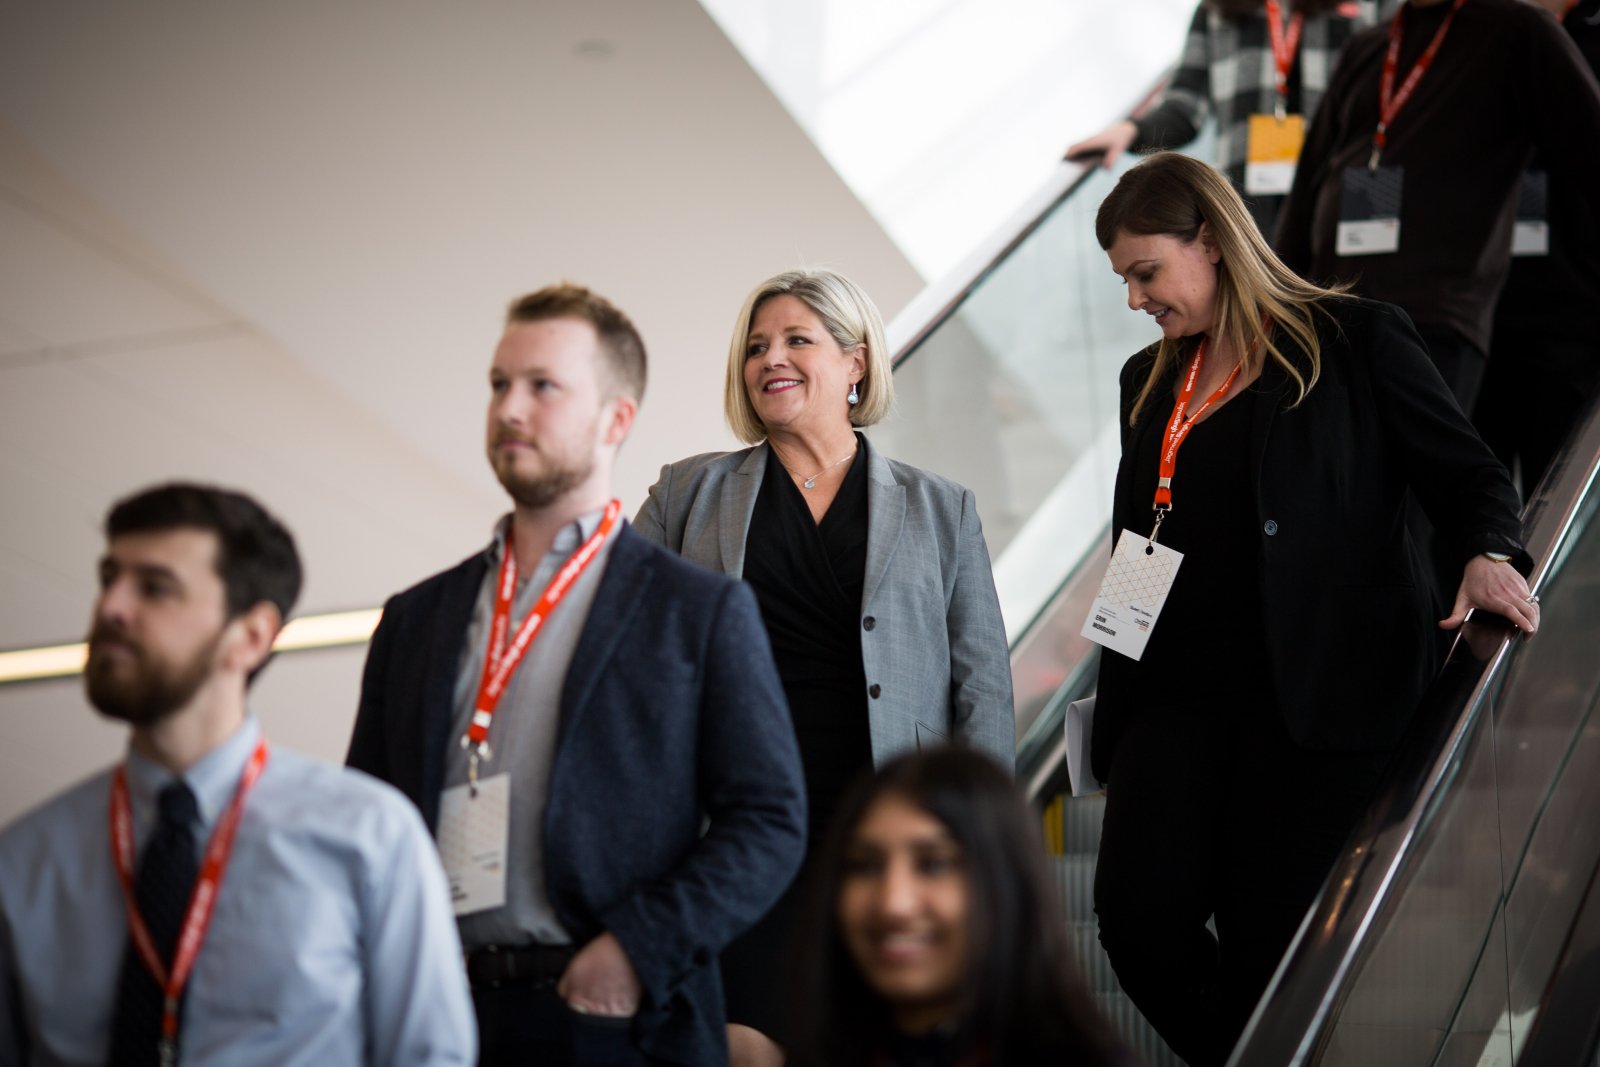 Ontario NDP leader Andrea Horwath heads to a press conference at the Shaw Conference Centre in Ottawa on Feb. 17, 2018 during the NDP's convention. Photo by Alex Tétreault 